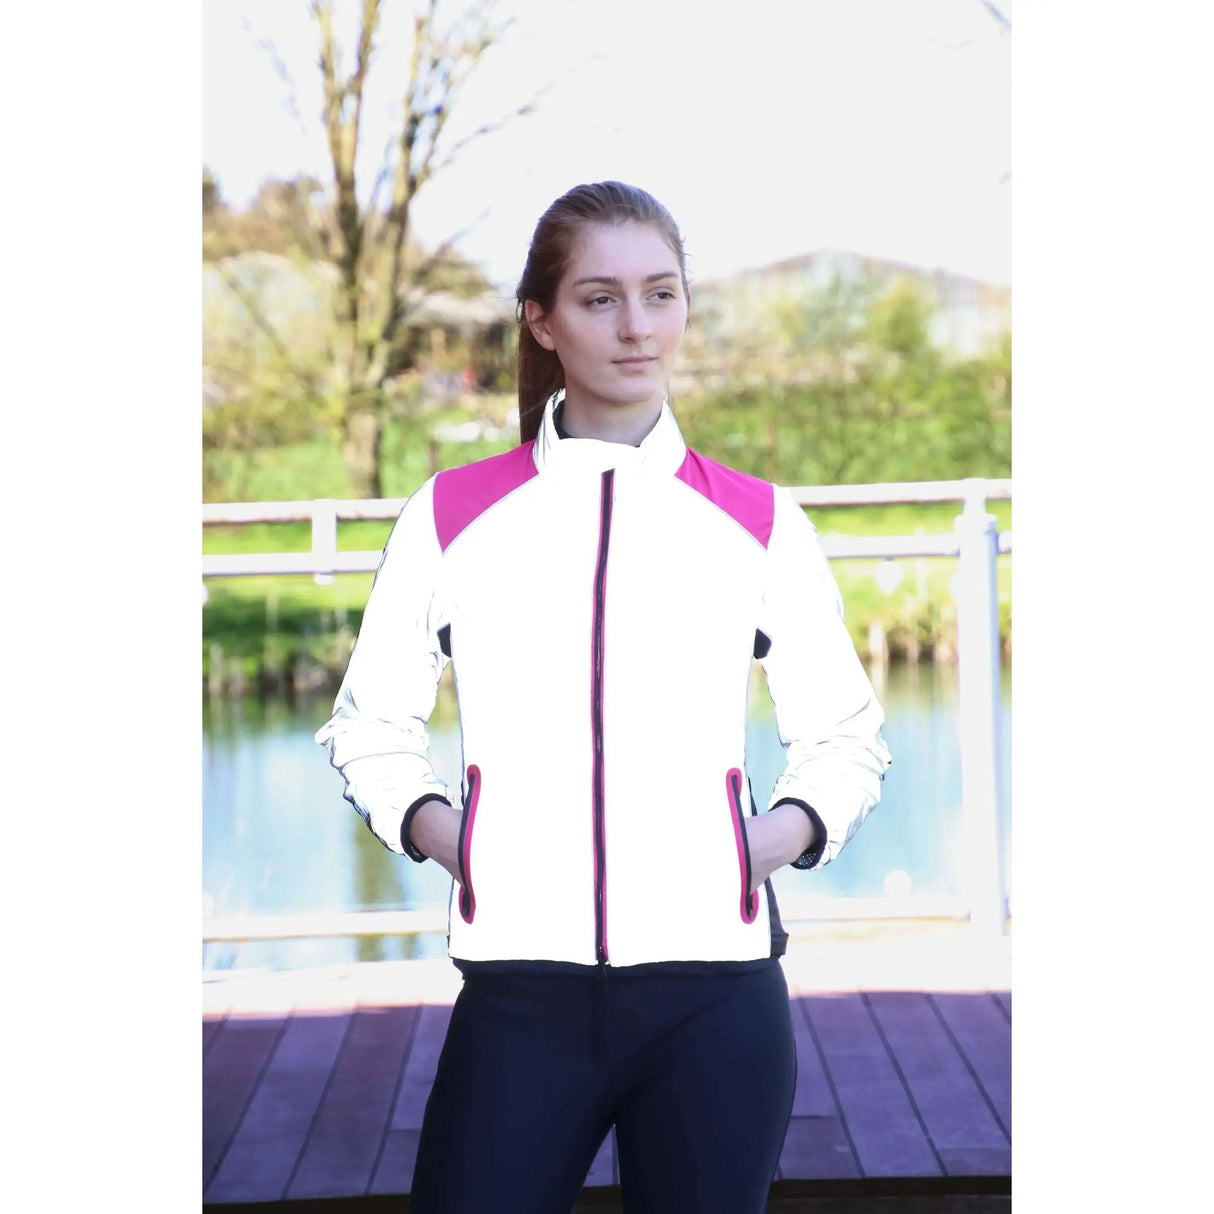 Reflector Jacket by Hy Equestrian Outdoor Coats & Jackets Pink X Small Barnstaple Equestrian Supplies